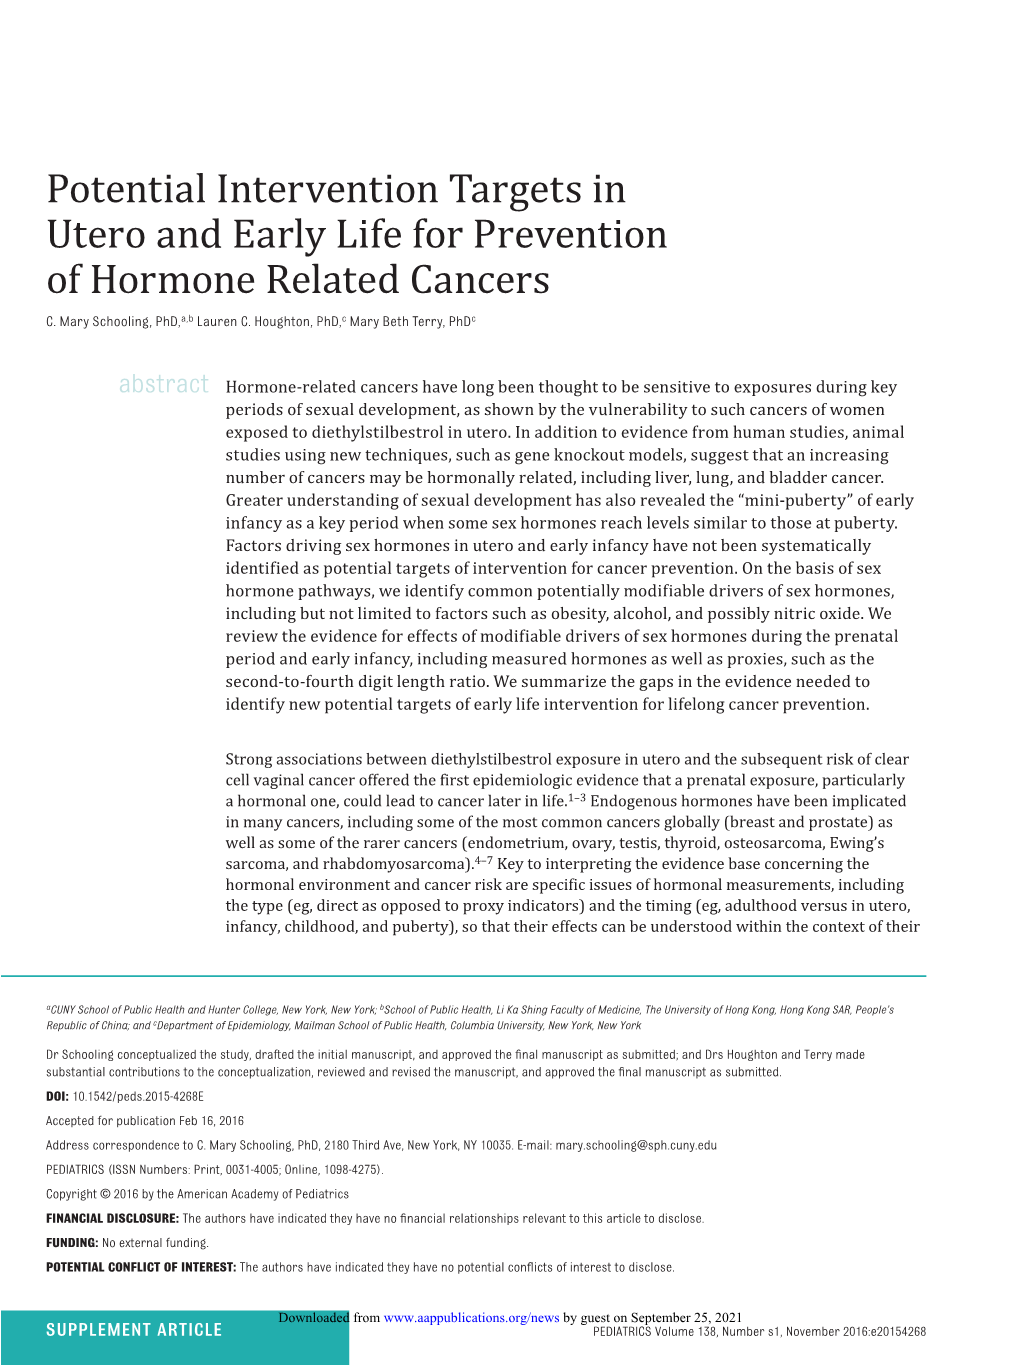 Potential Intervention Targets in Utero and Early Life for Prevention of Hormone Related Cancers C